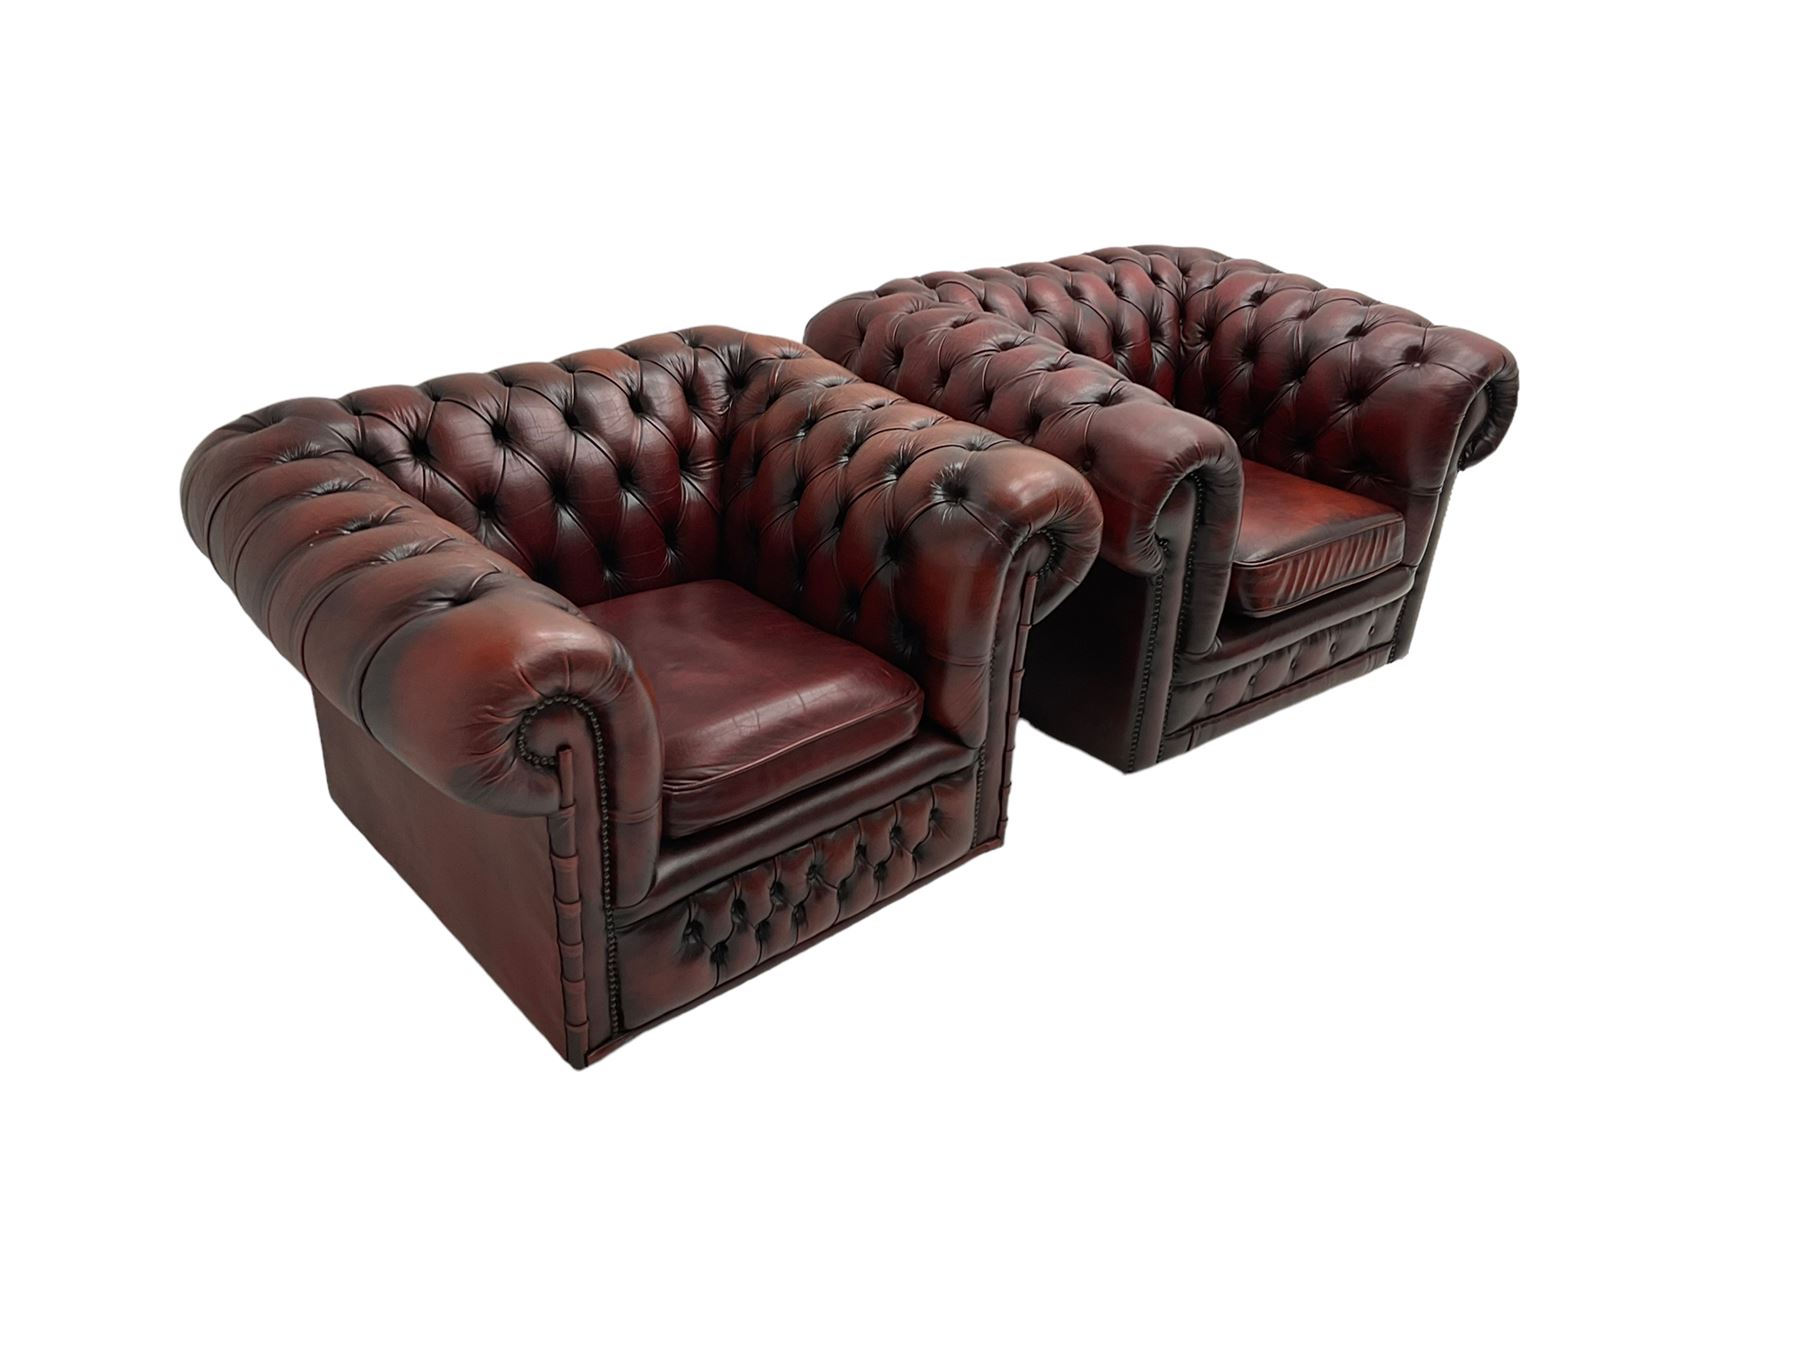 Pair chesterfield armchairs in oxblood leather - Image 4 of 7